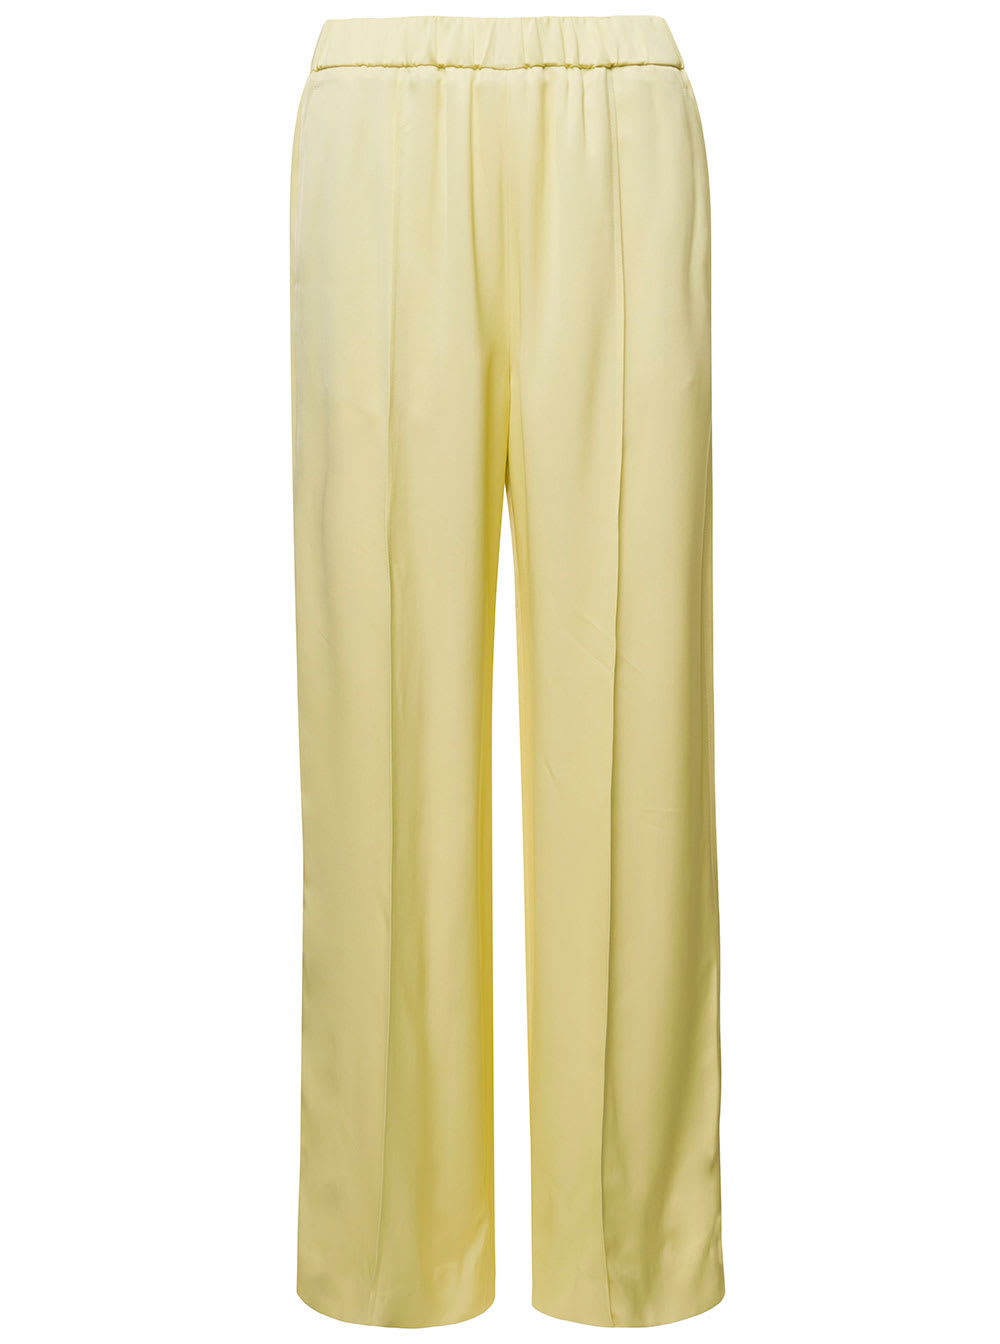 JIL SANDER YELLOW HIGH WASITED TROUSERS IN VISCOSE WOMAN